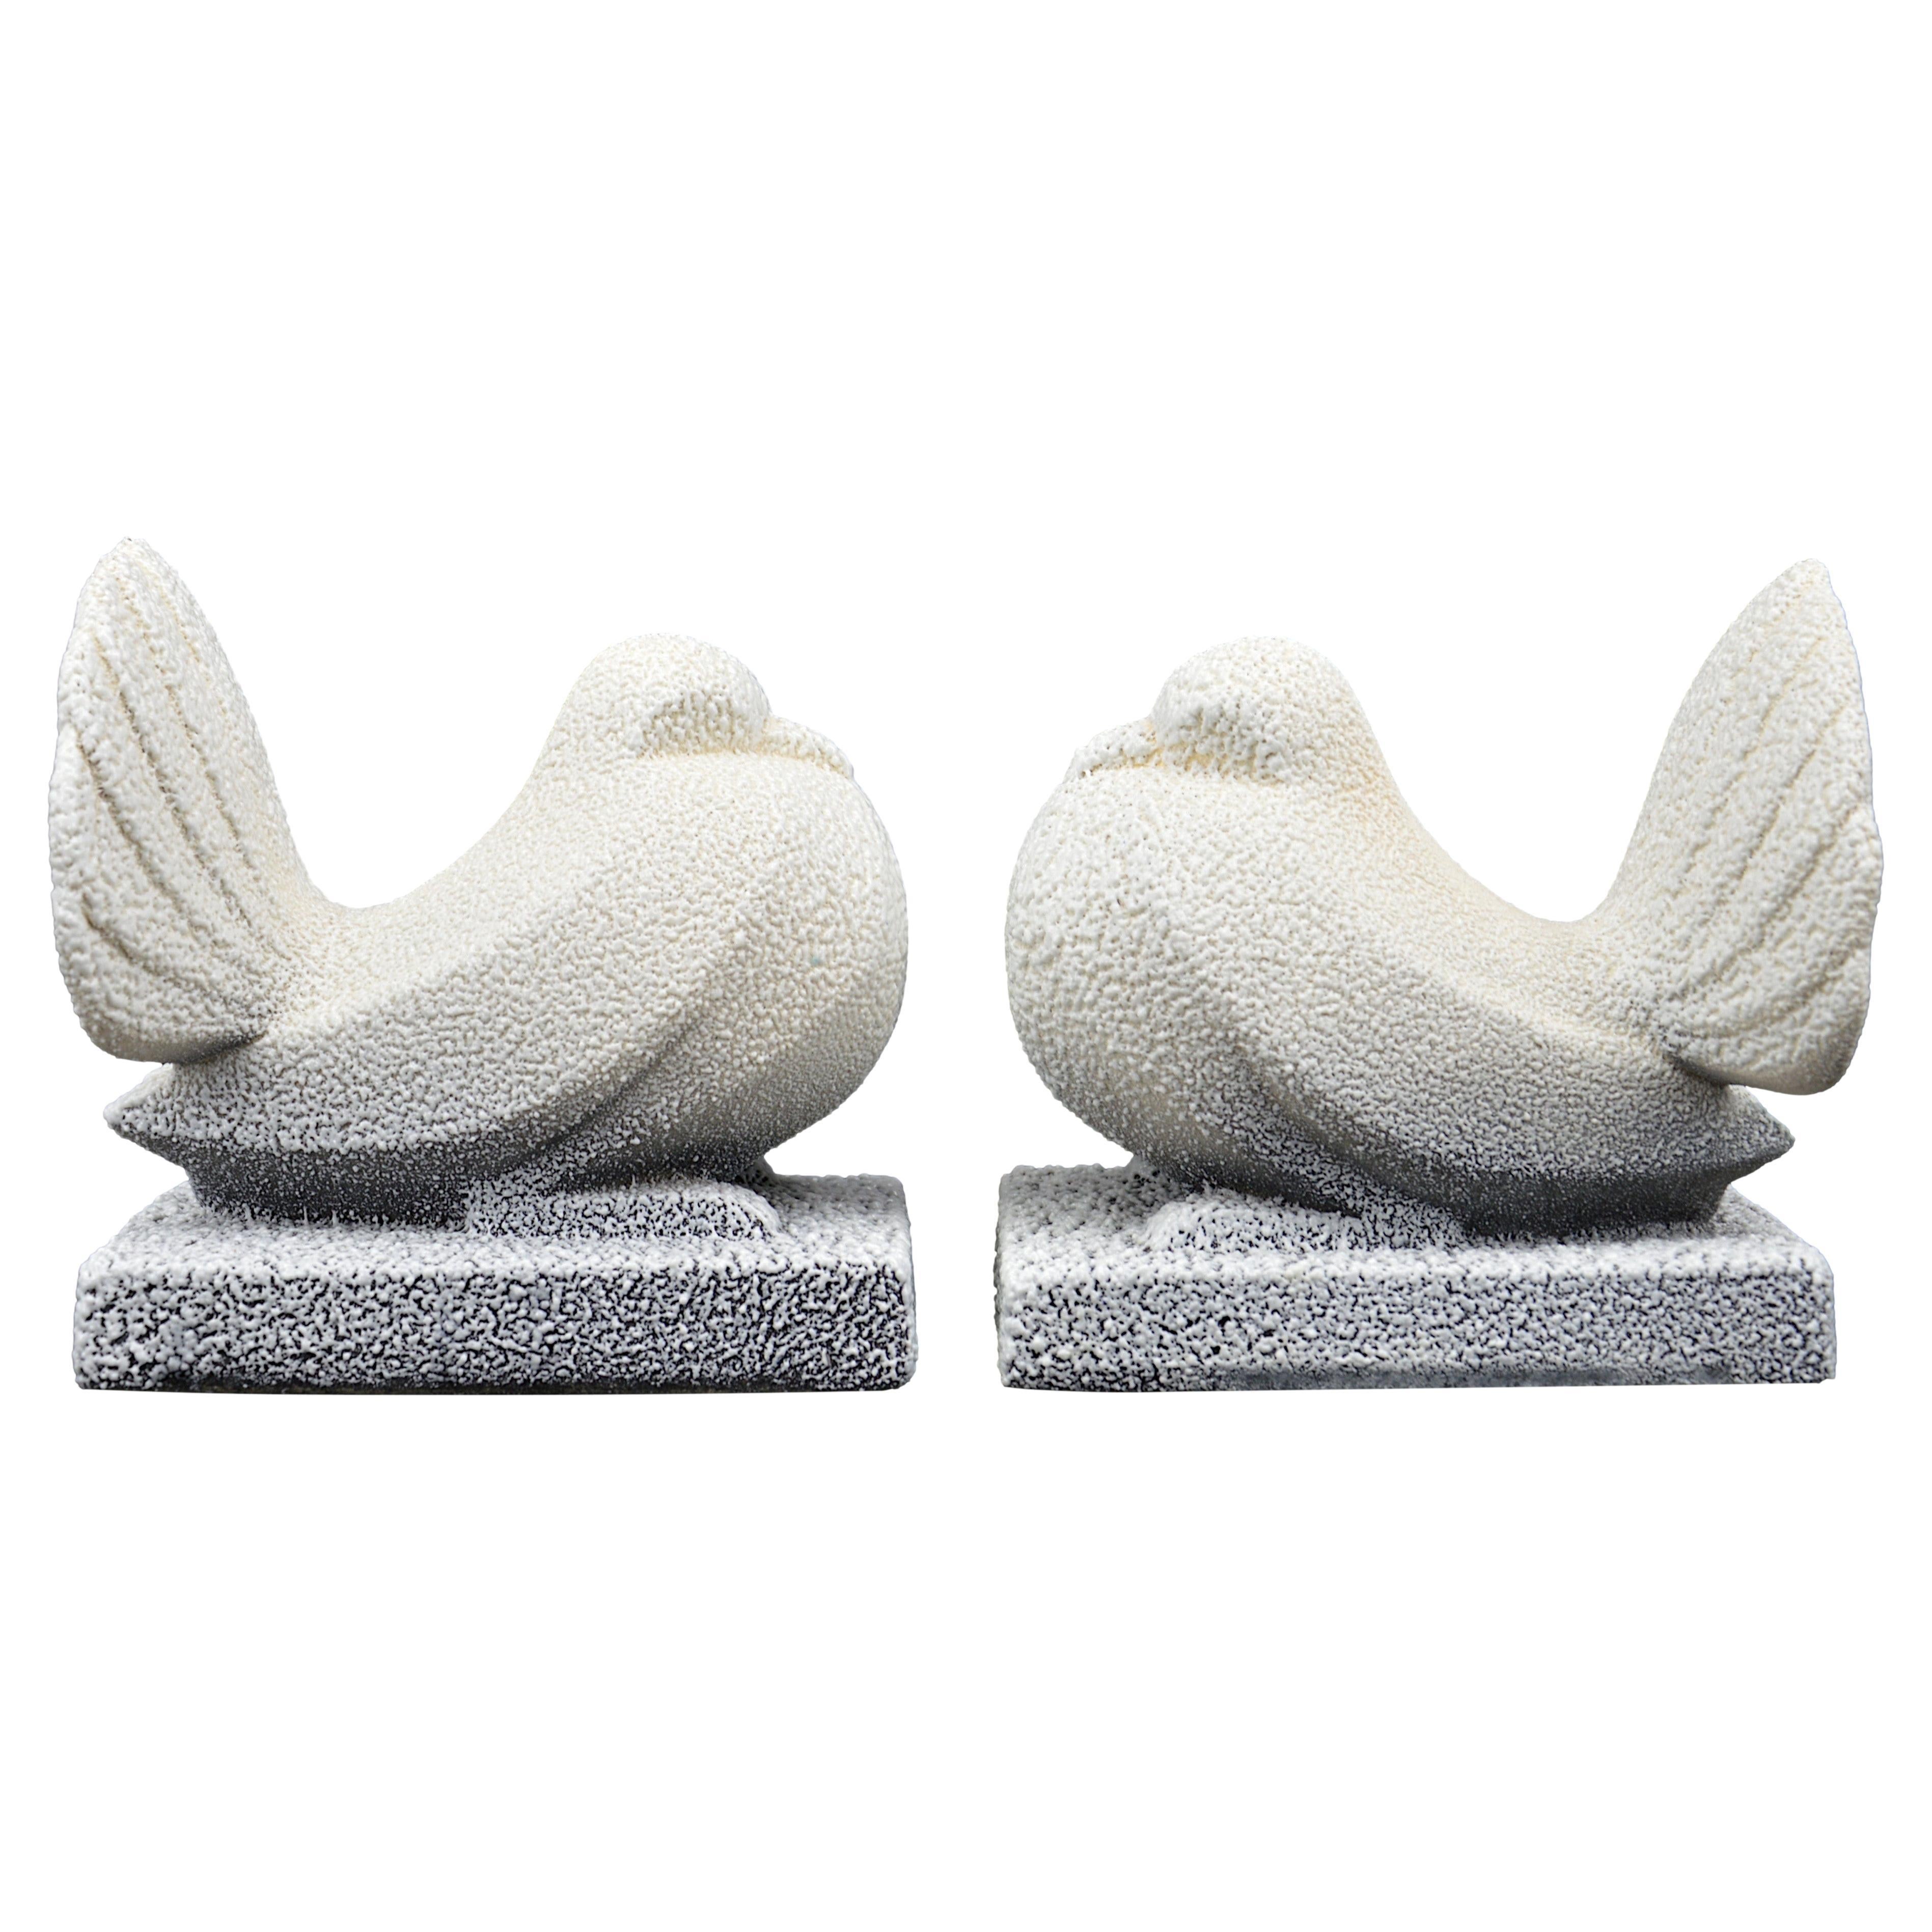 ODYV French Art Deco Ceramic Pigeons Bookends, 1930s